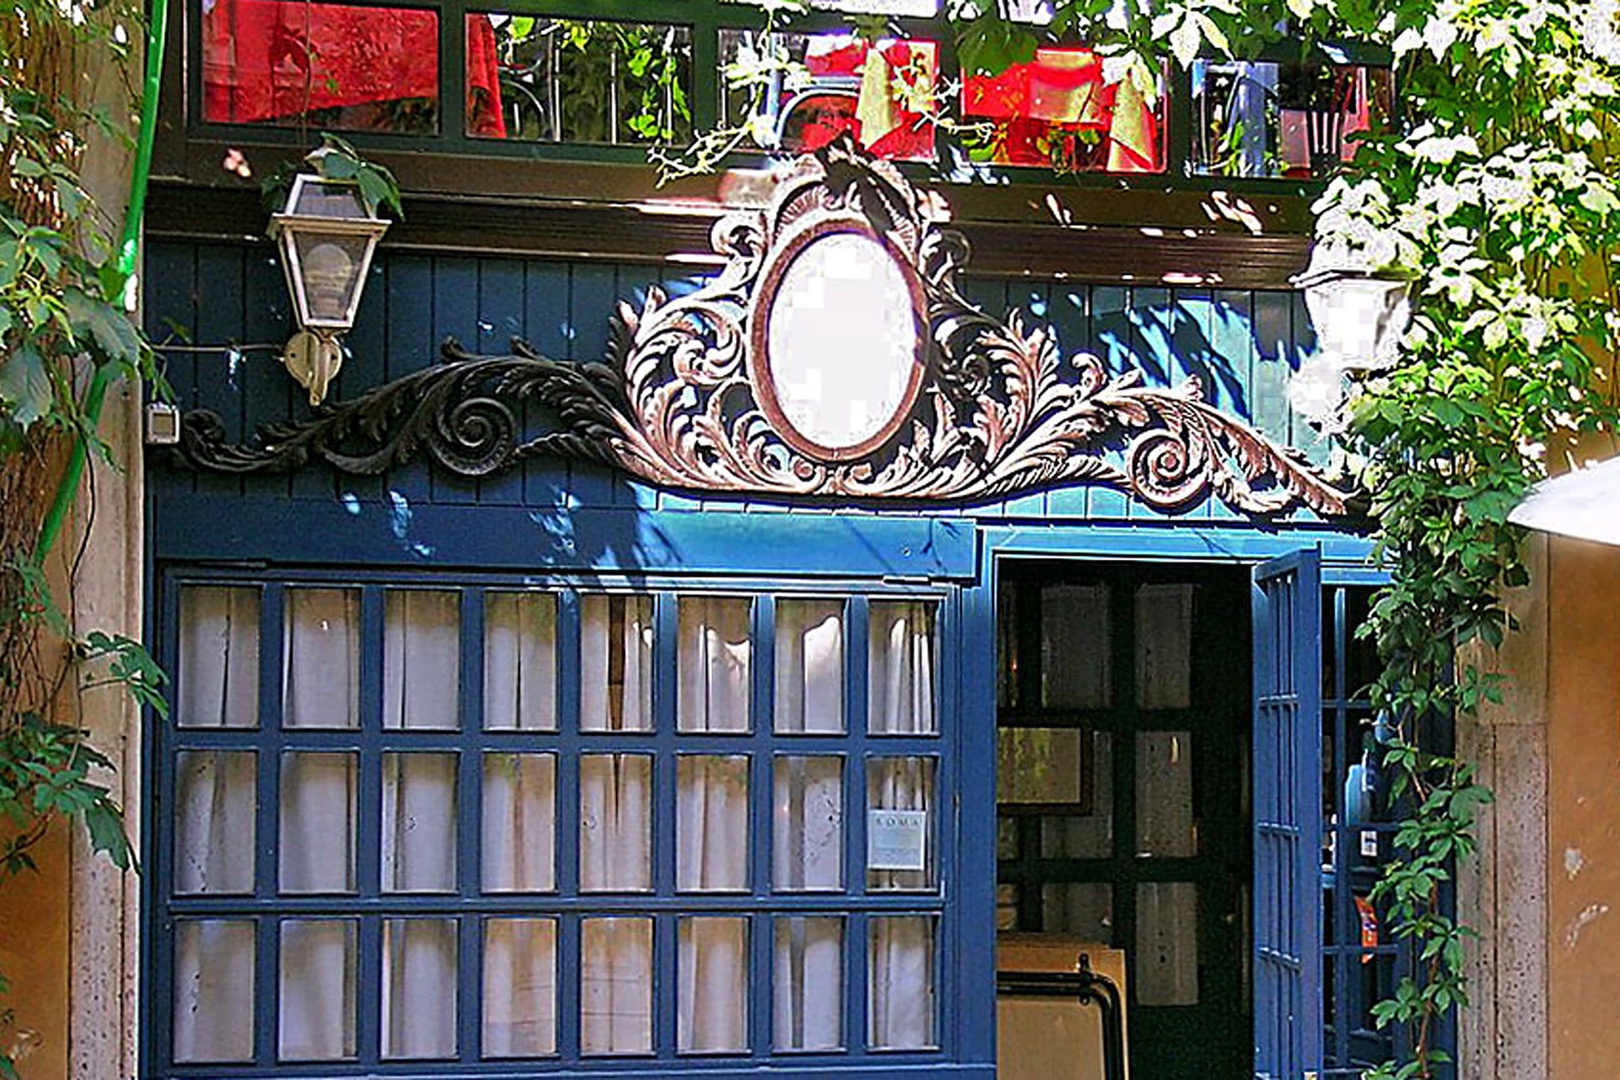 Dine indoors or out on Via Margutta, just a few steps away; famous for its beauty and antique shops.